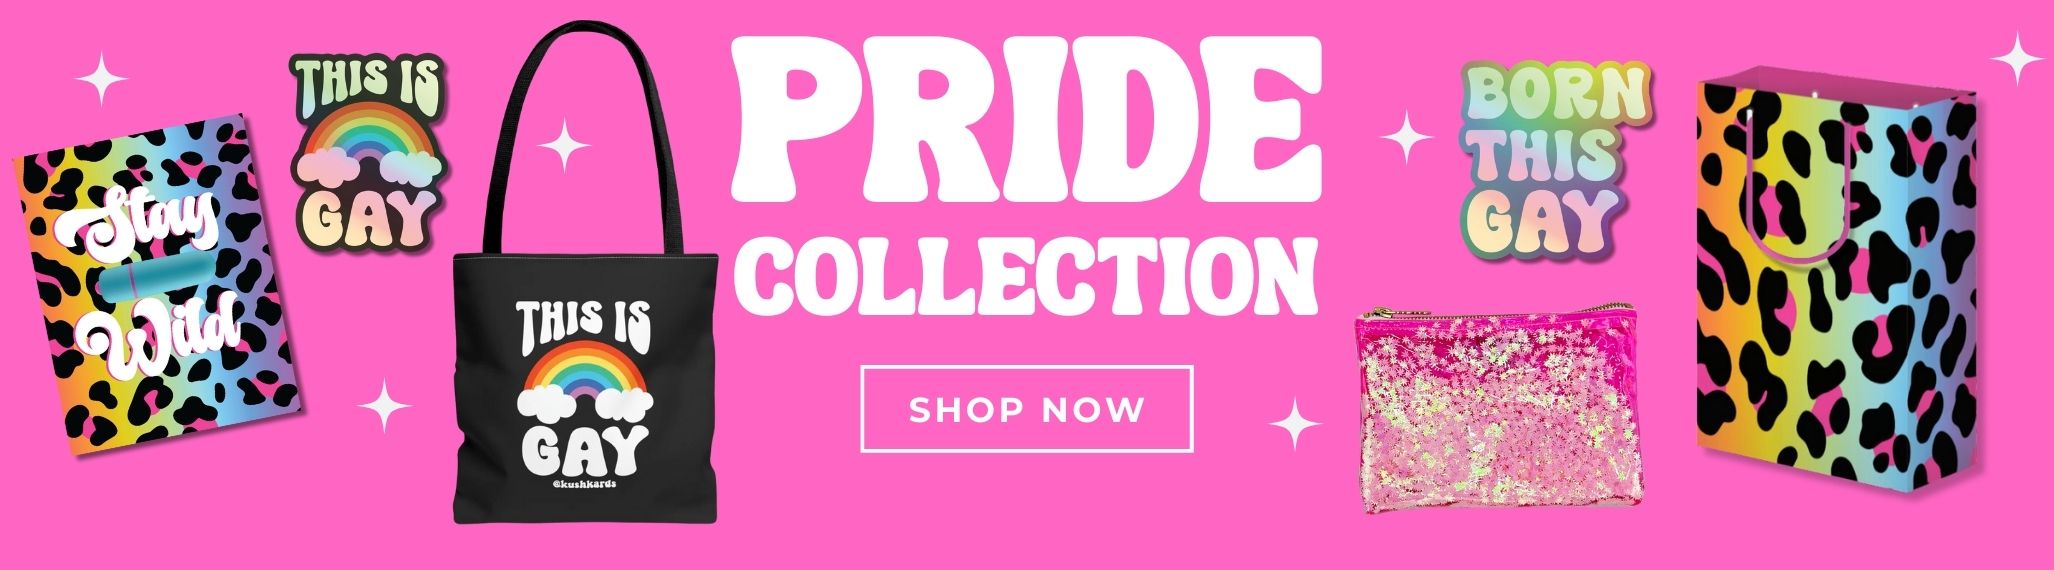 Pride Collection banner with colorful leopard print designs on various items including a 'Stay Wild' notebook, 'This is Gay' sticker and tote bag with a rainbow, 'Born This Gay' sticker, and a glittery pink zipper pouch. Shop now.